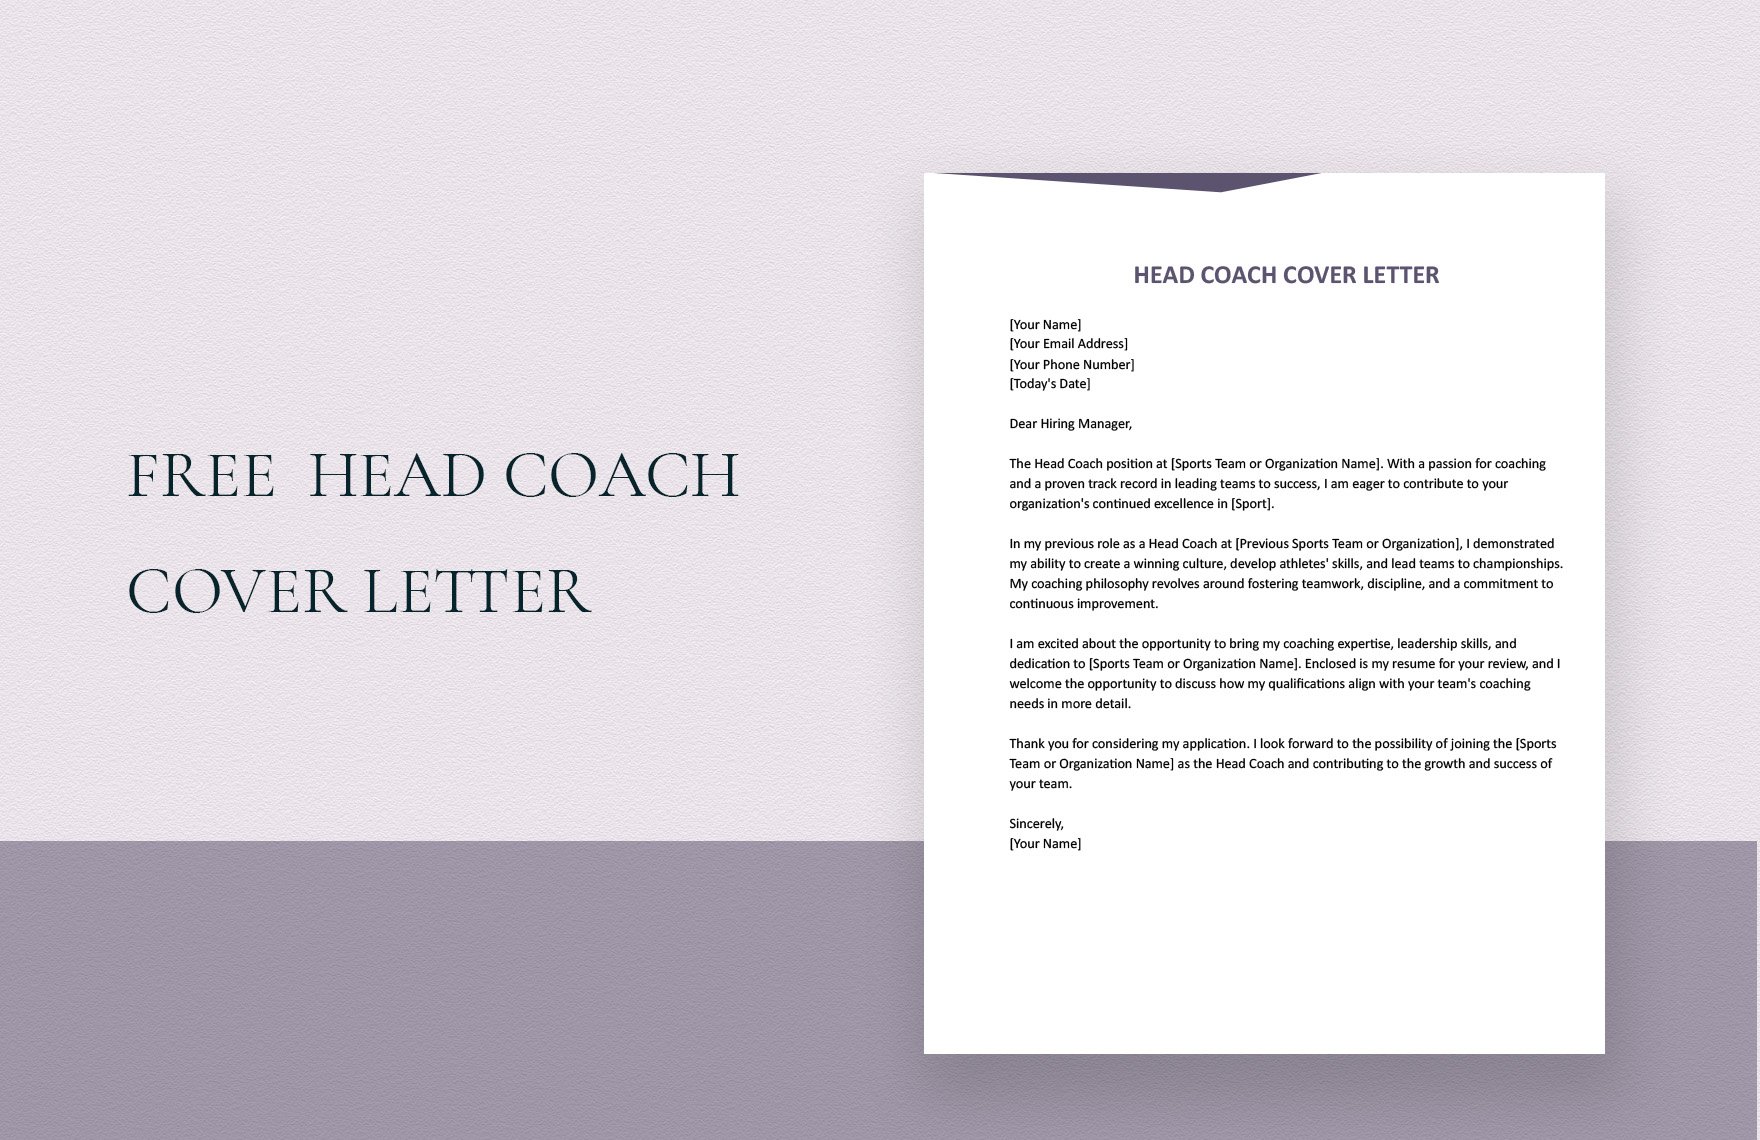 Head Coach Cover Letter in Word, Google Docs